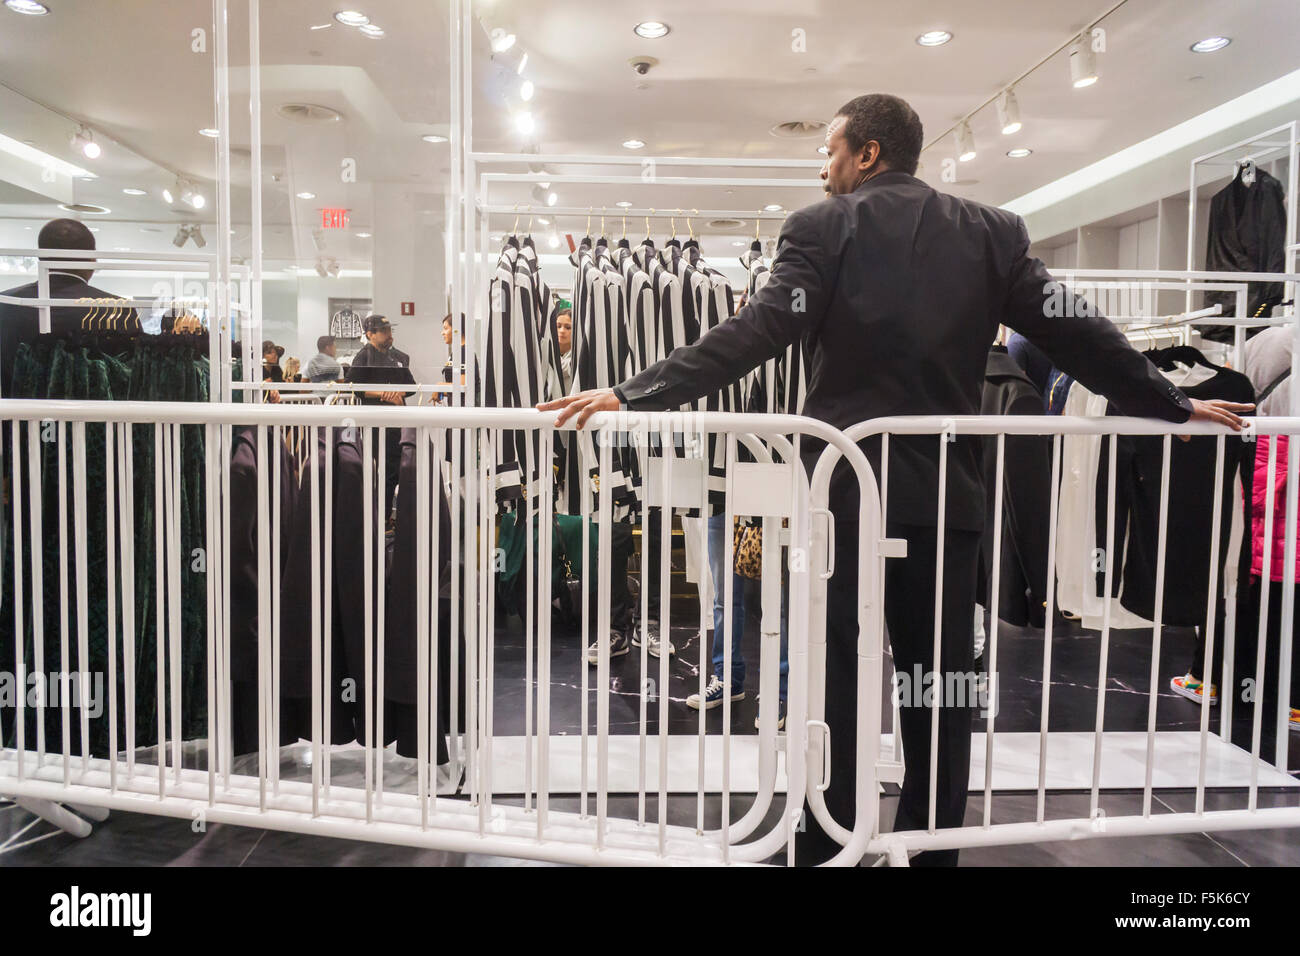 New York, USA. 05th Nov, 2015. A security guard in the designated Balmain x H&M section of an H&M store in New York on Thursday, November 5, 2015. The collection, designed by the young head of Balmain, Olivier Rousteing, was highly anticipated by fashionistas and drew crowds around the world. In New York H&M instituted a wristband system to time when shoppers could arrive to control crowds. Credit:  Richard Levine/Alamy Live News Stock Photo